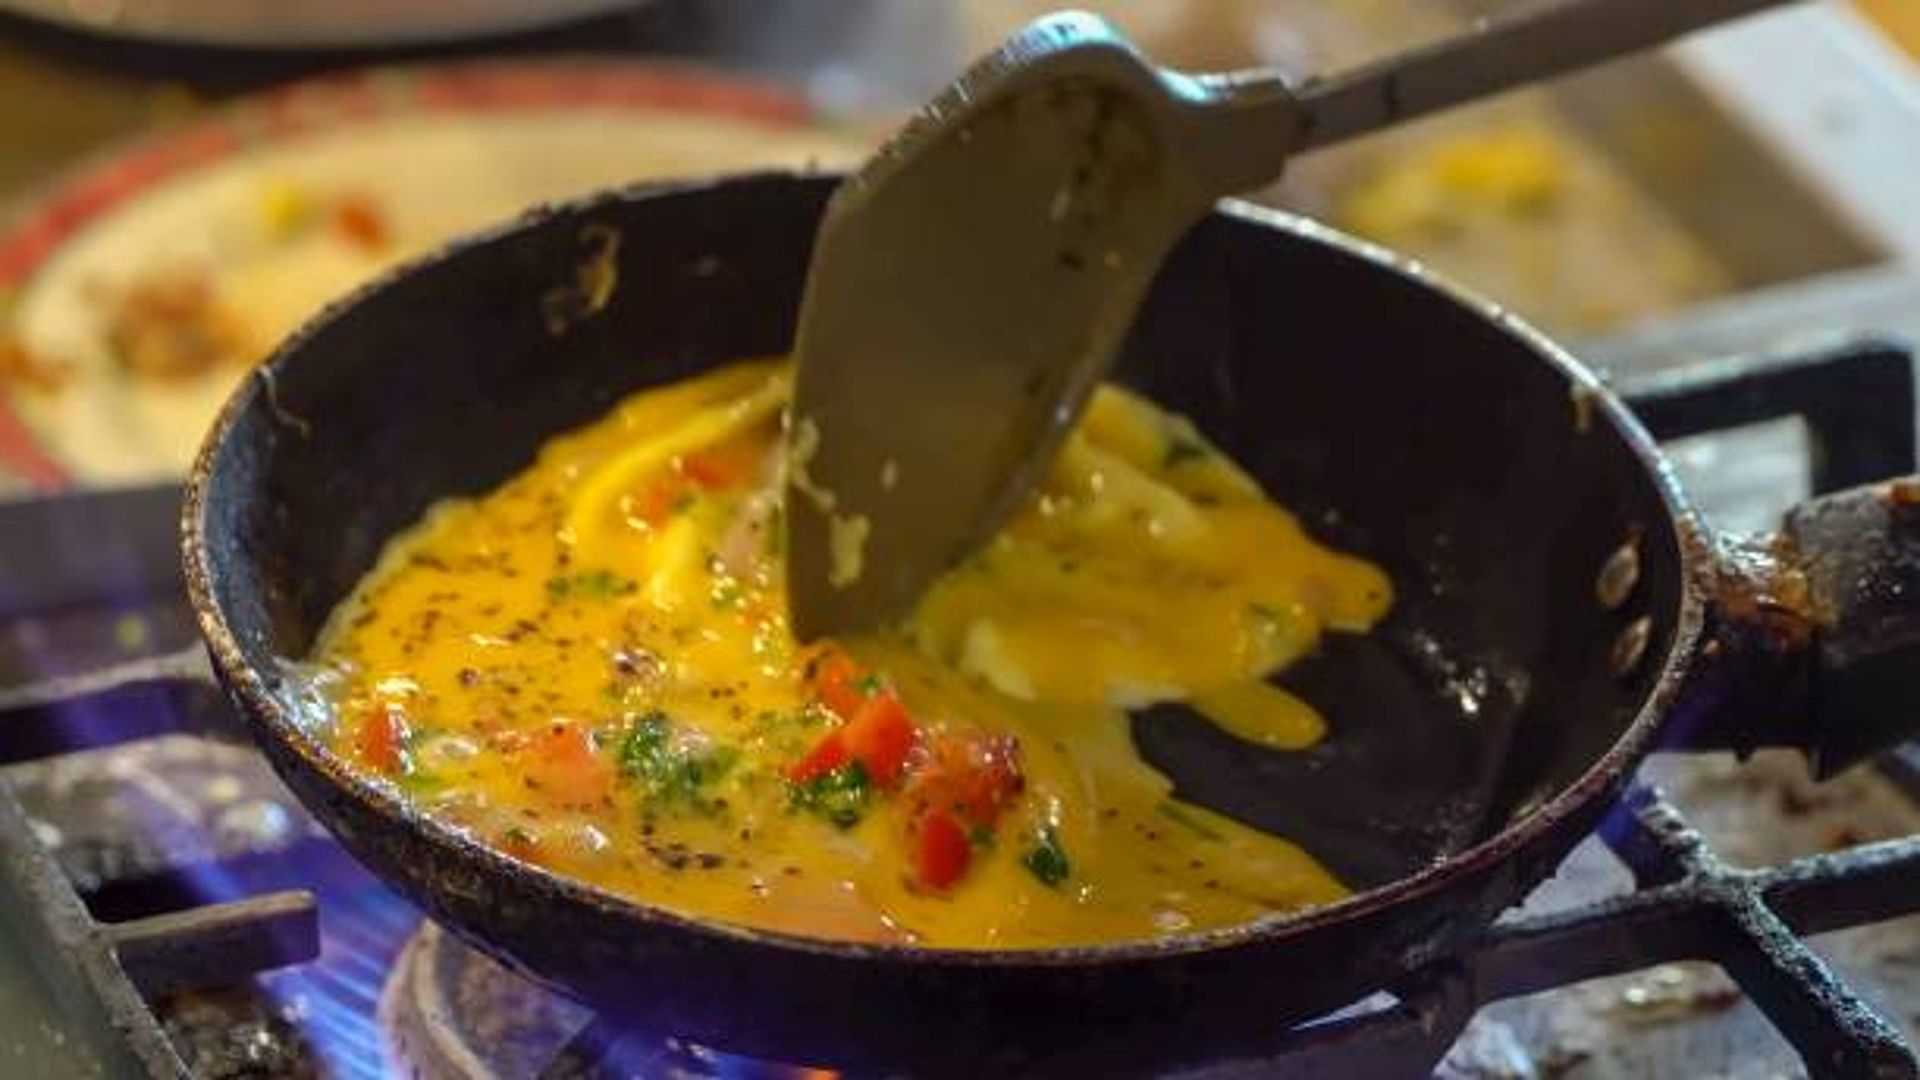 This omelet is made of water instead of oil or butter people are surprised to see the video